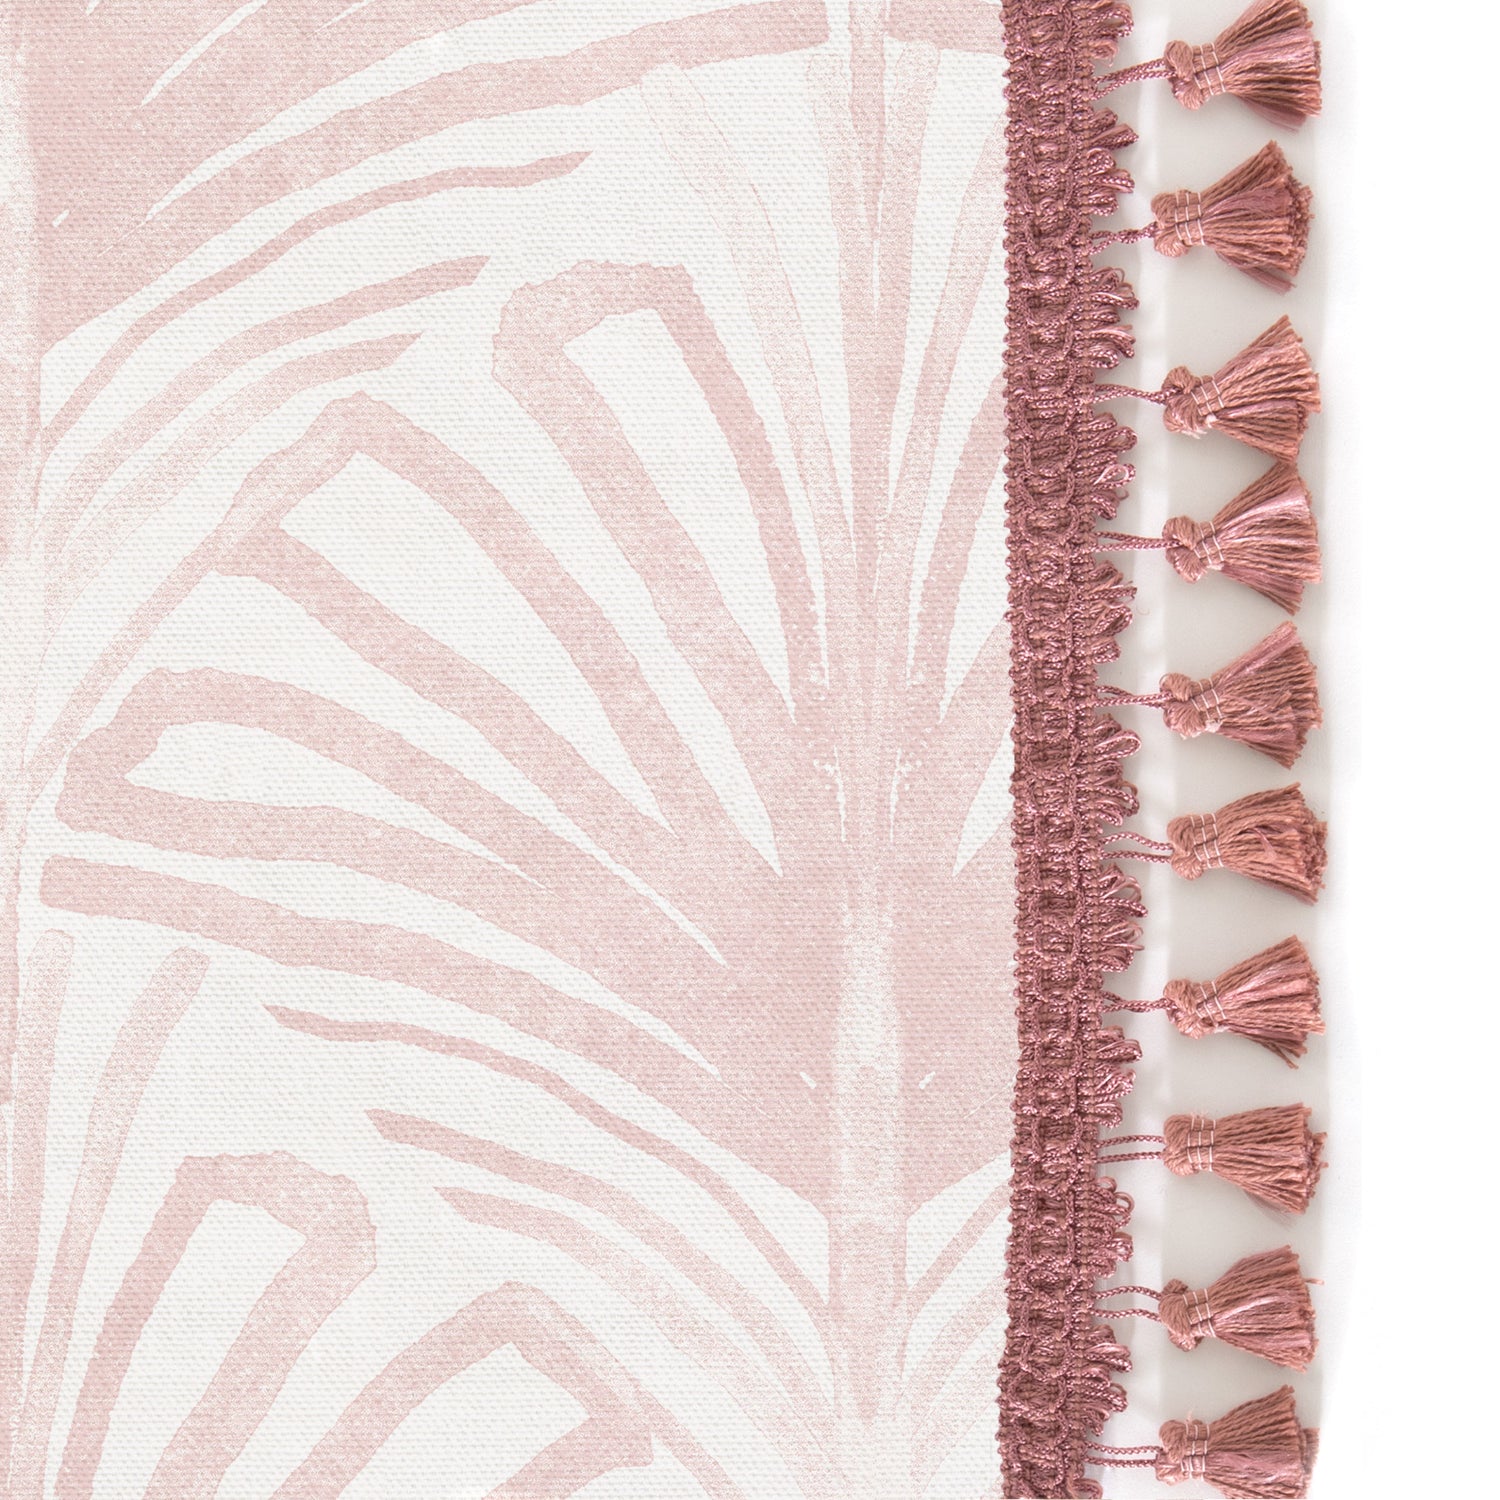 Upclose picture of Suzy Rose custom shower curtain with dusty rose tassel trim